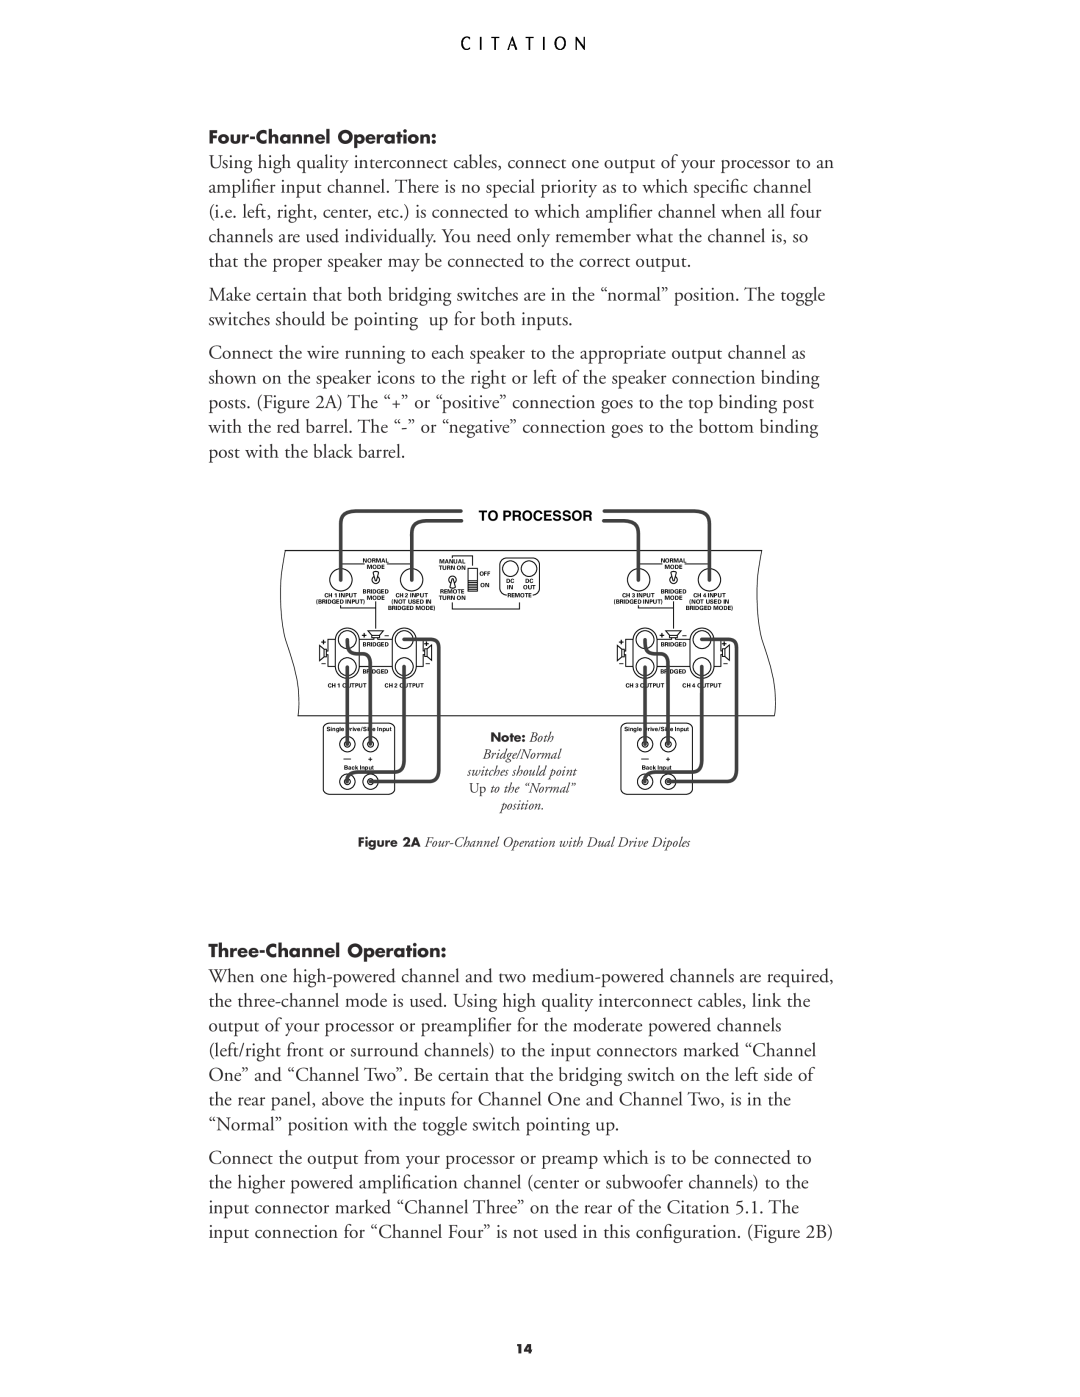 Harman-Kardon 5.1 manual To Processor, Bridge/Normal, A Four-Channel Operation with Dual Drive Dipoles 